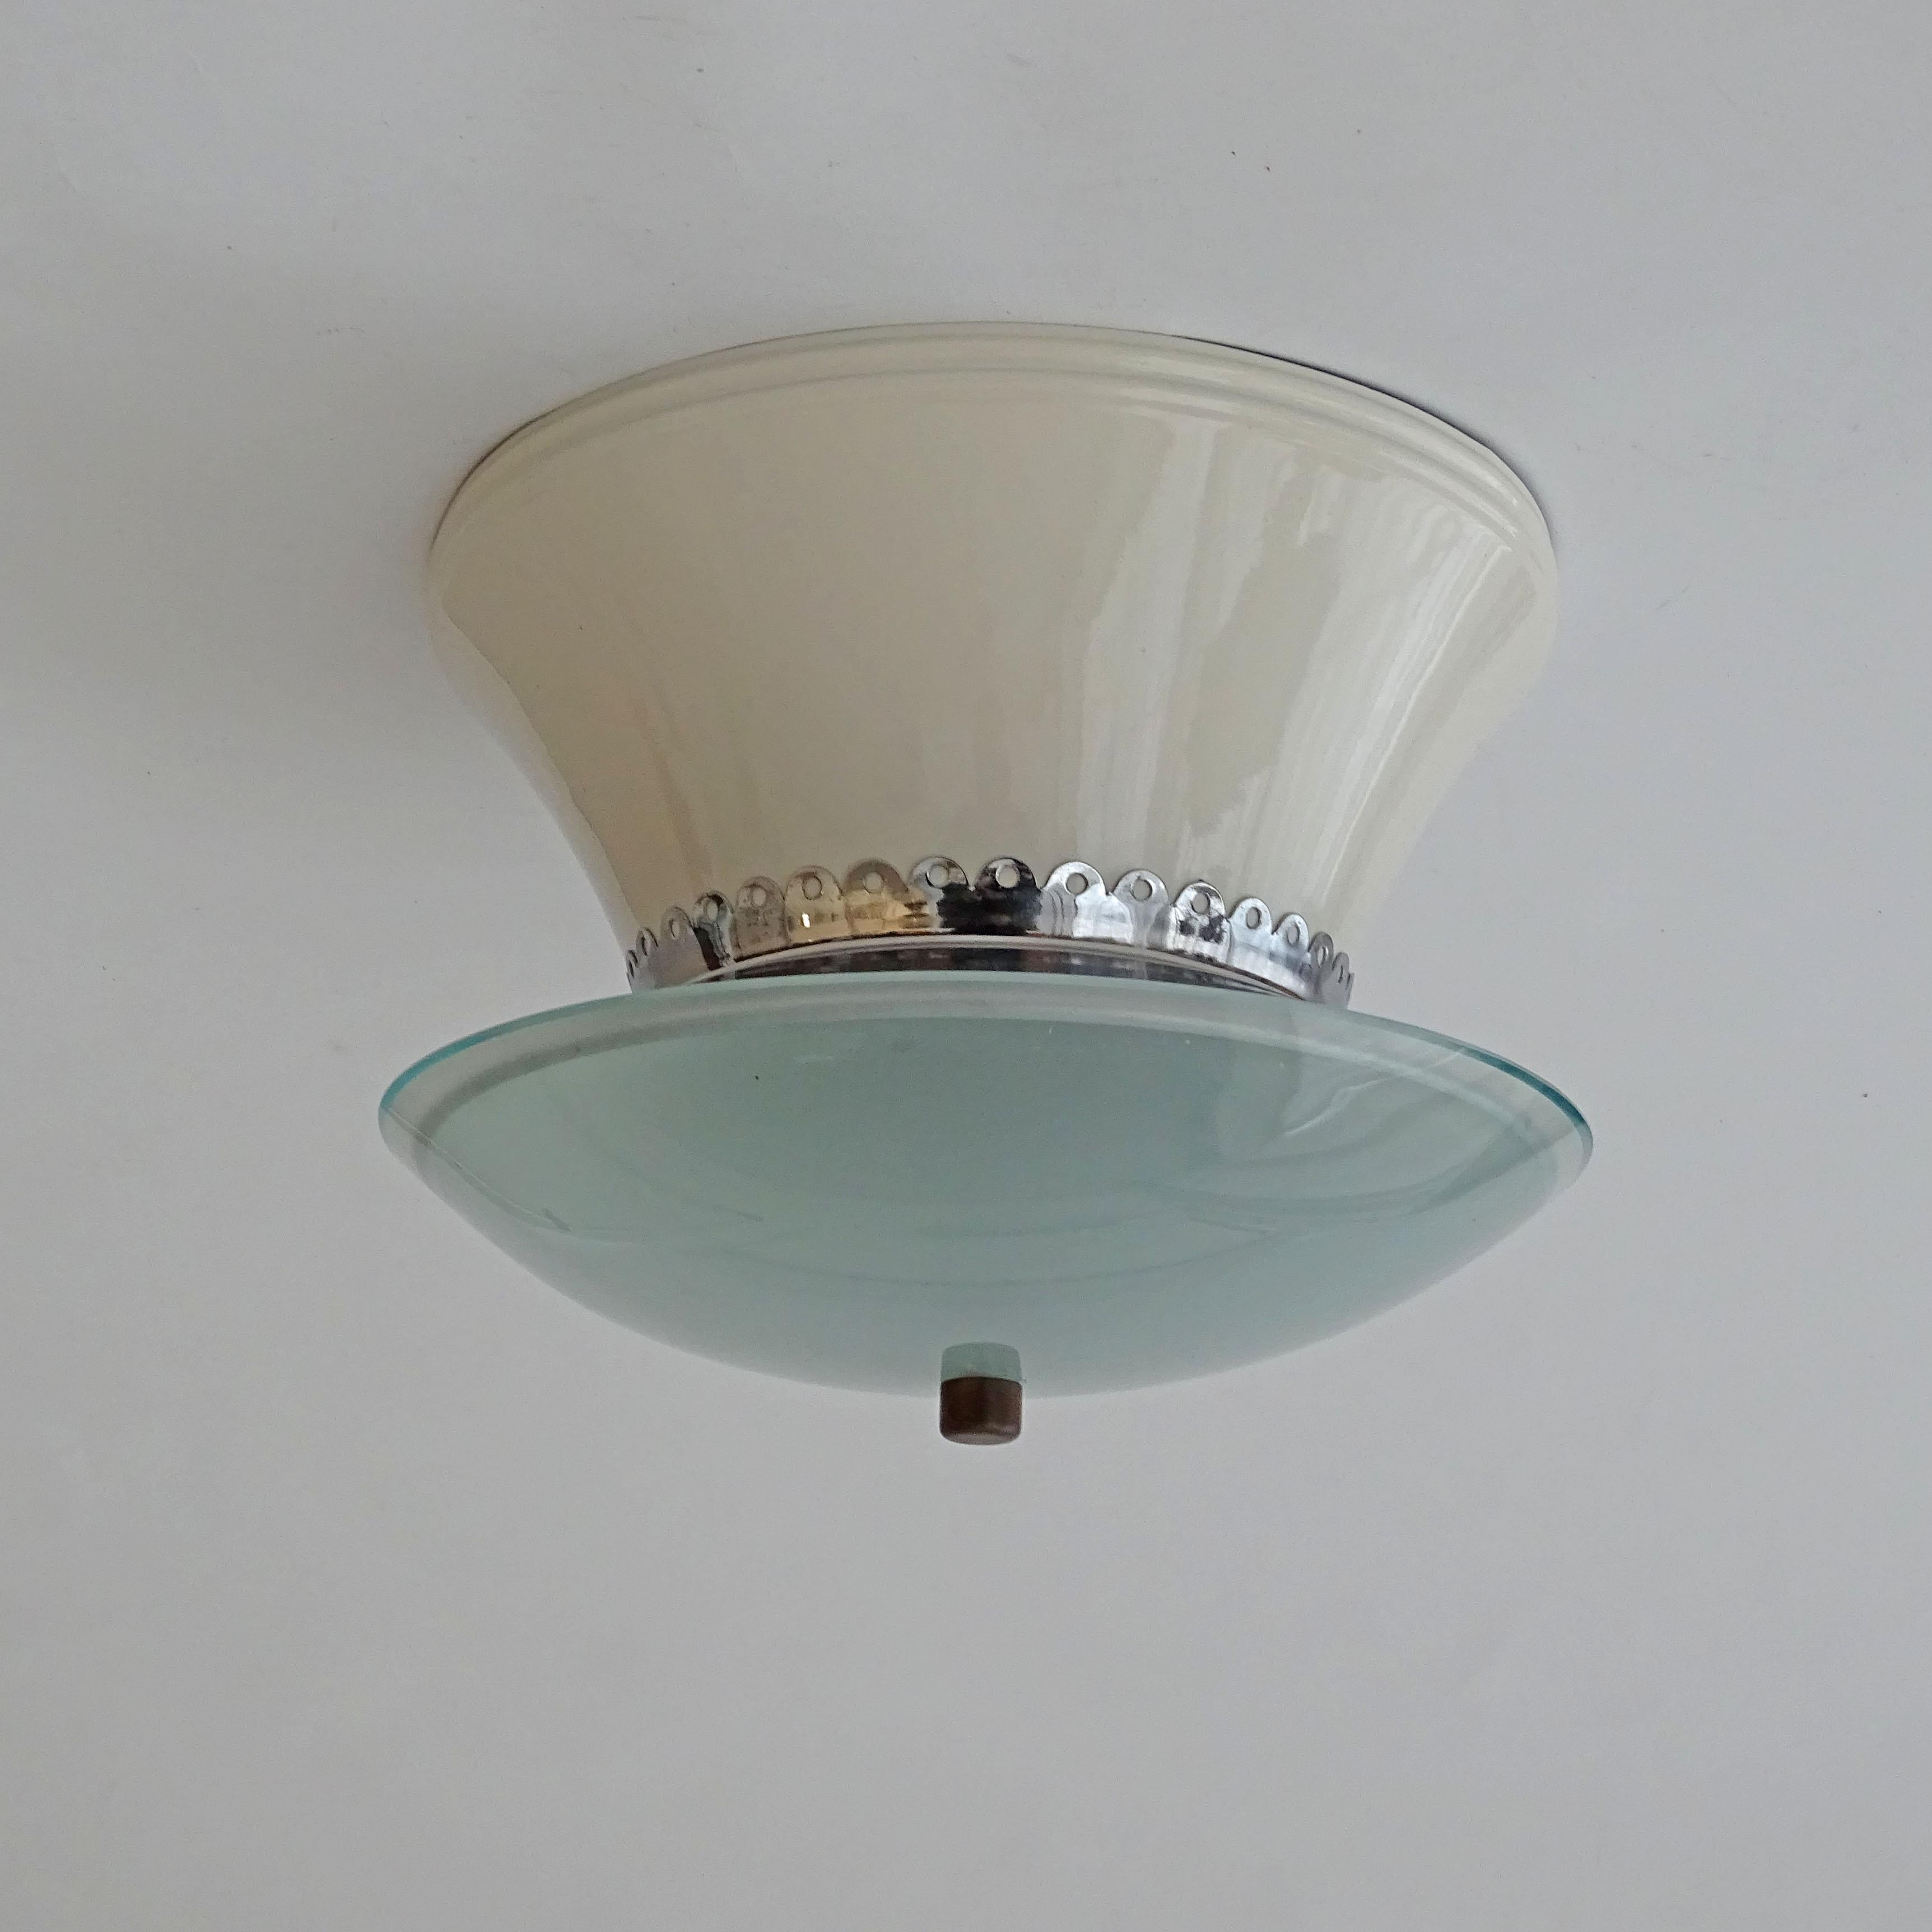 Early Stilnovo Flush Mount Ceiling Light, Italy 1940s In Good Condition For Sale In Milan, IT